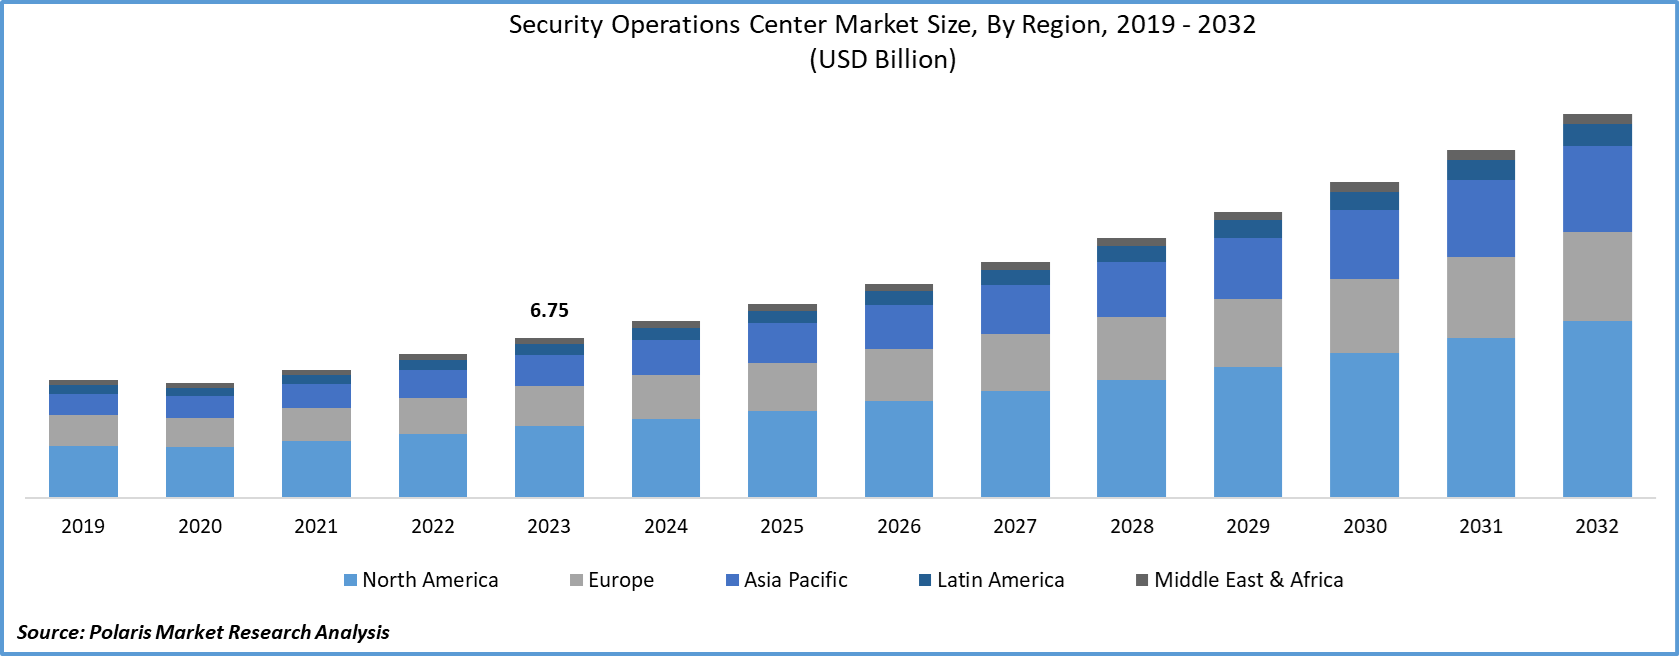 Security Operations Center (SOC) Market Size